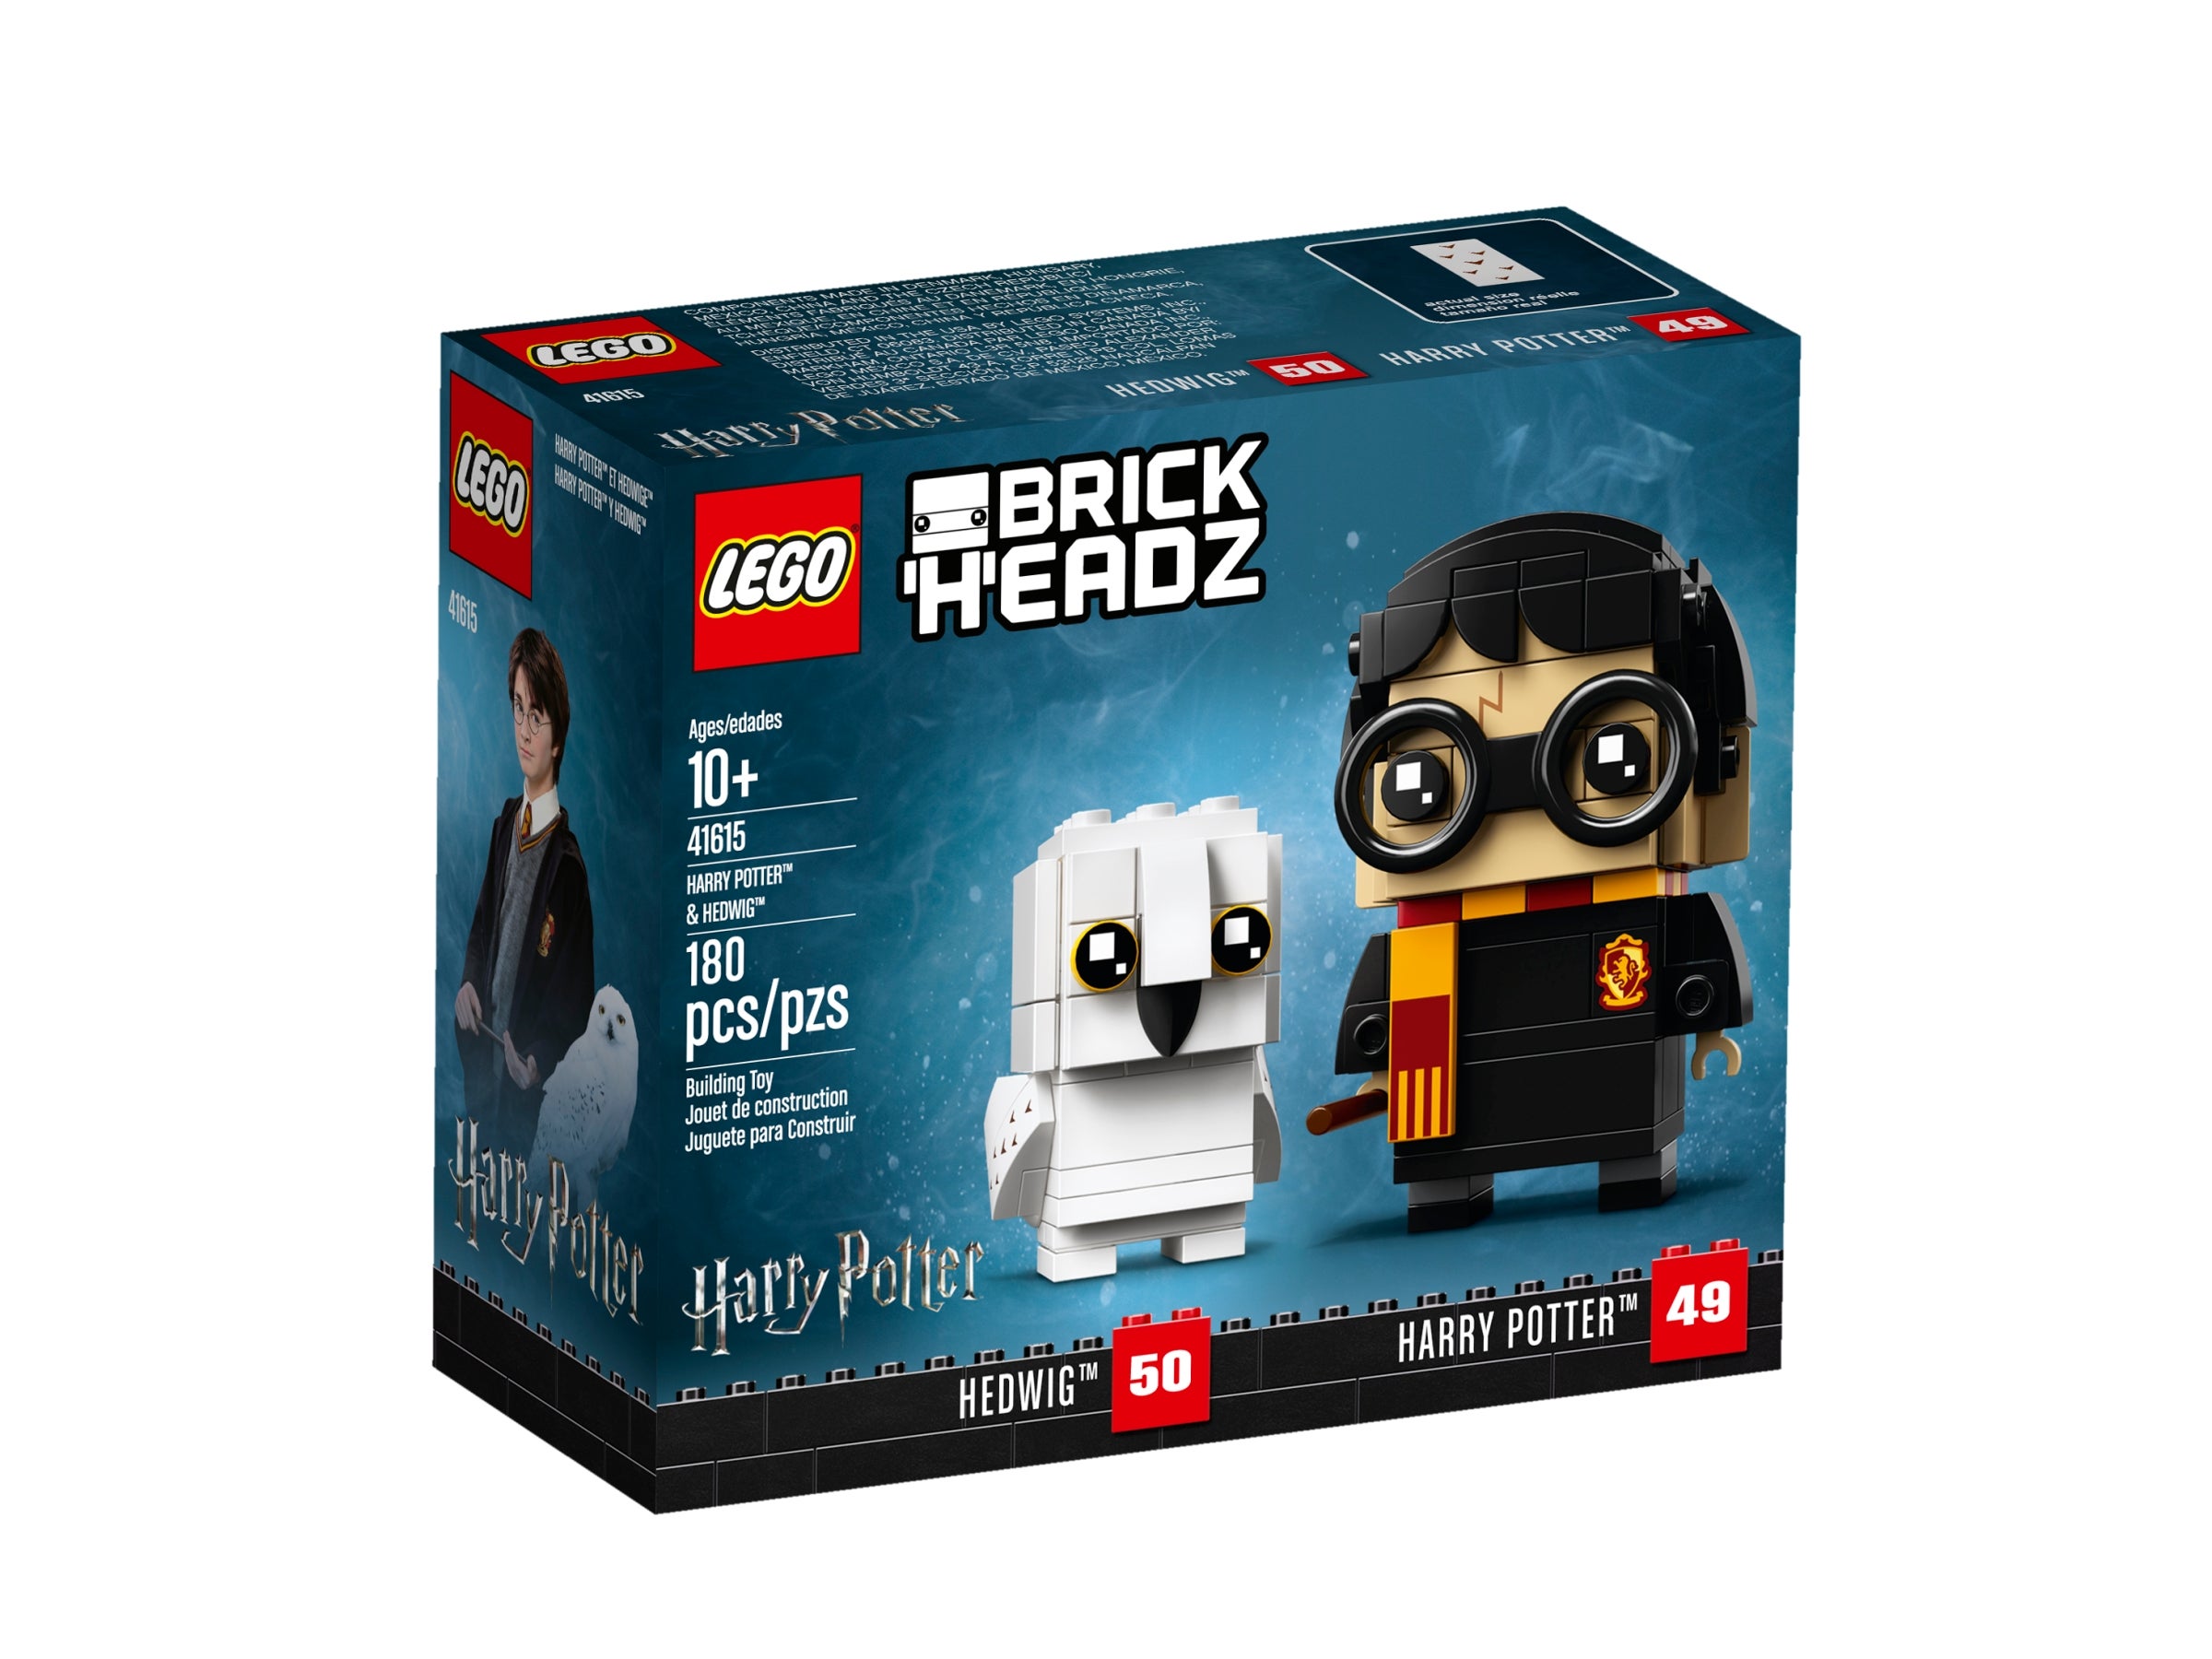 Lego 41615 Harry Potter & HEDWIG BRAND NEW